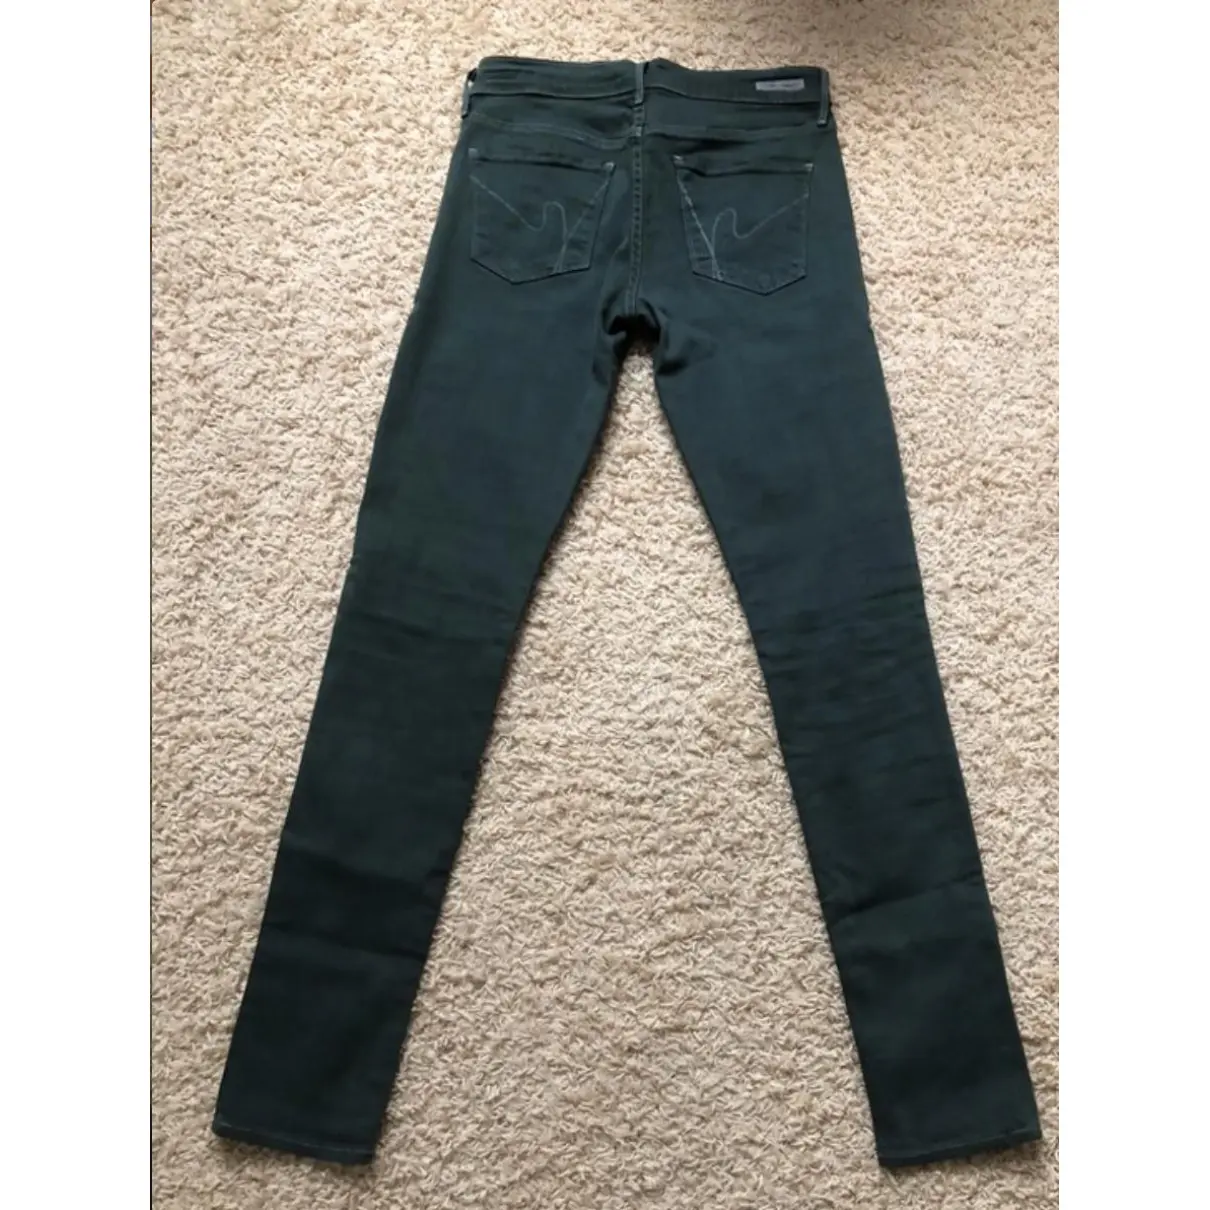 Citizens Of Humanity Slim pants for sale